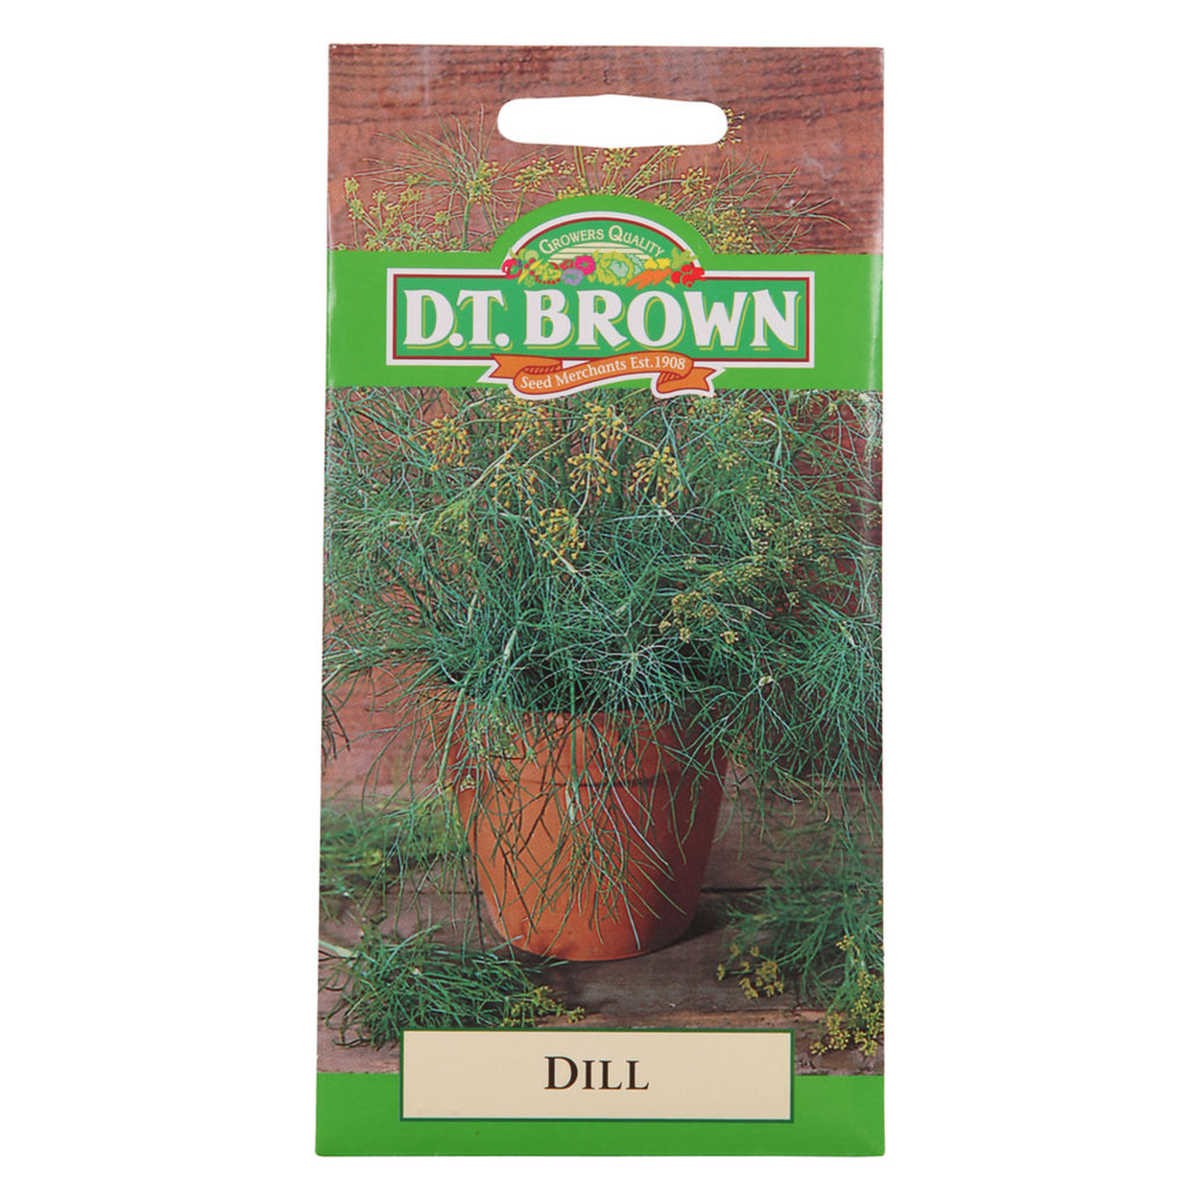 Buy DT Brown Dill Seeds | Dollars and Sense